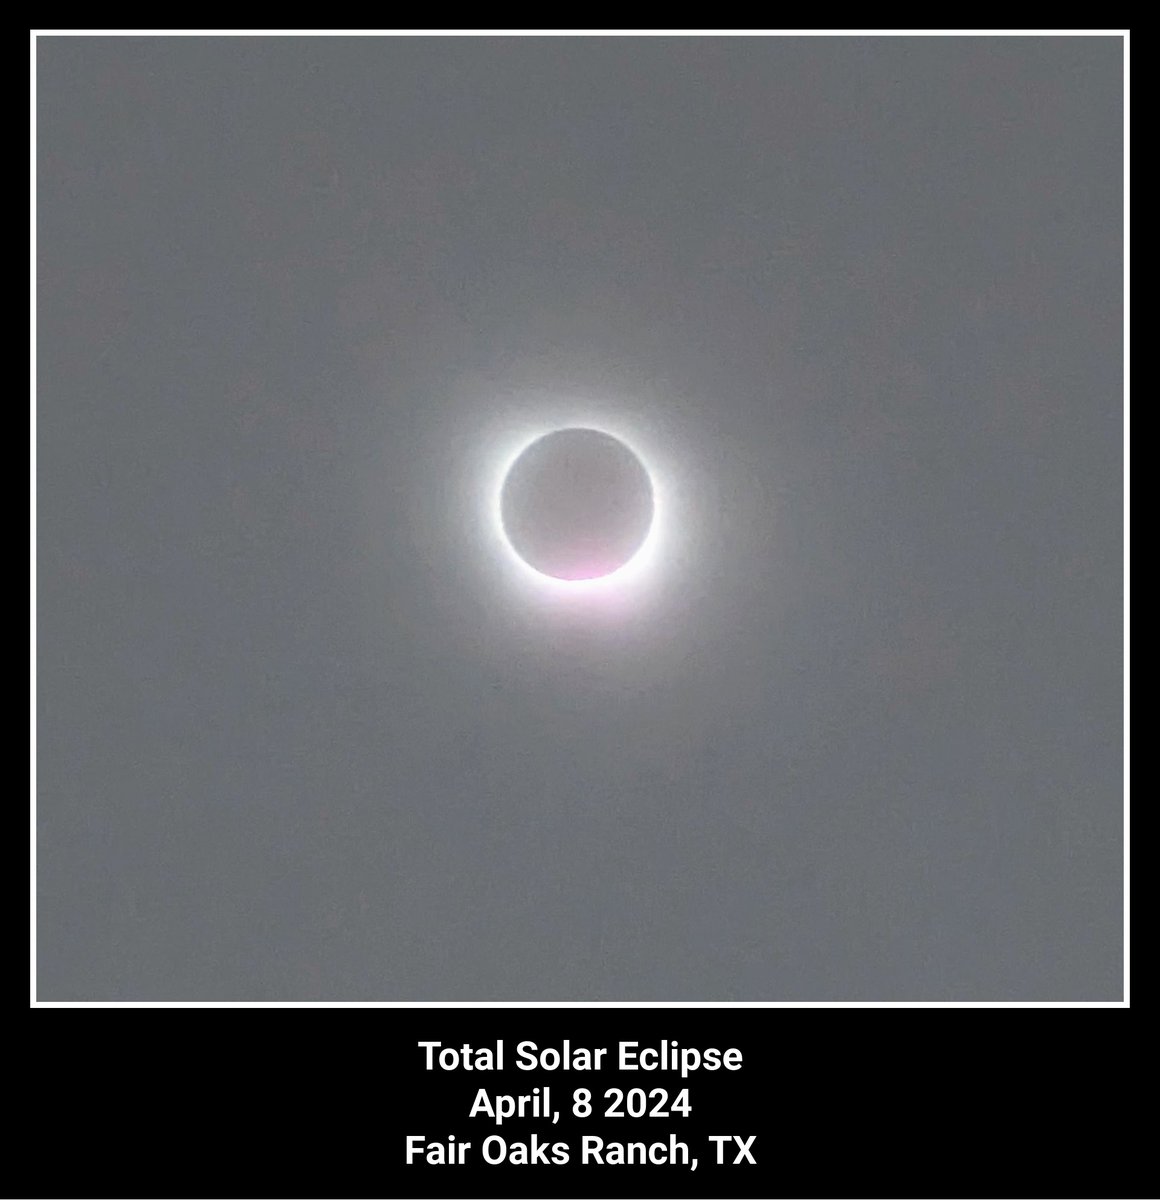 Patiently waited because of thick cloud cover and finally got a decent shot with my phone. I'm sure there are many grumbling about spending tons of money for a hotel room only to land a complete dud.

#eclipse #Eclipse2024 #EclipseSolar2024 #eclipsesolar #TexasHillCountry